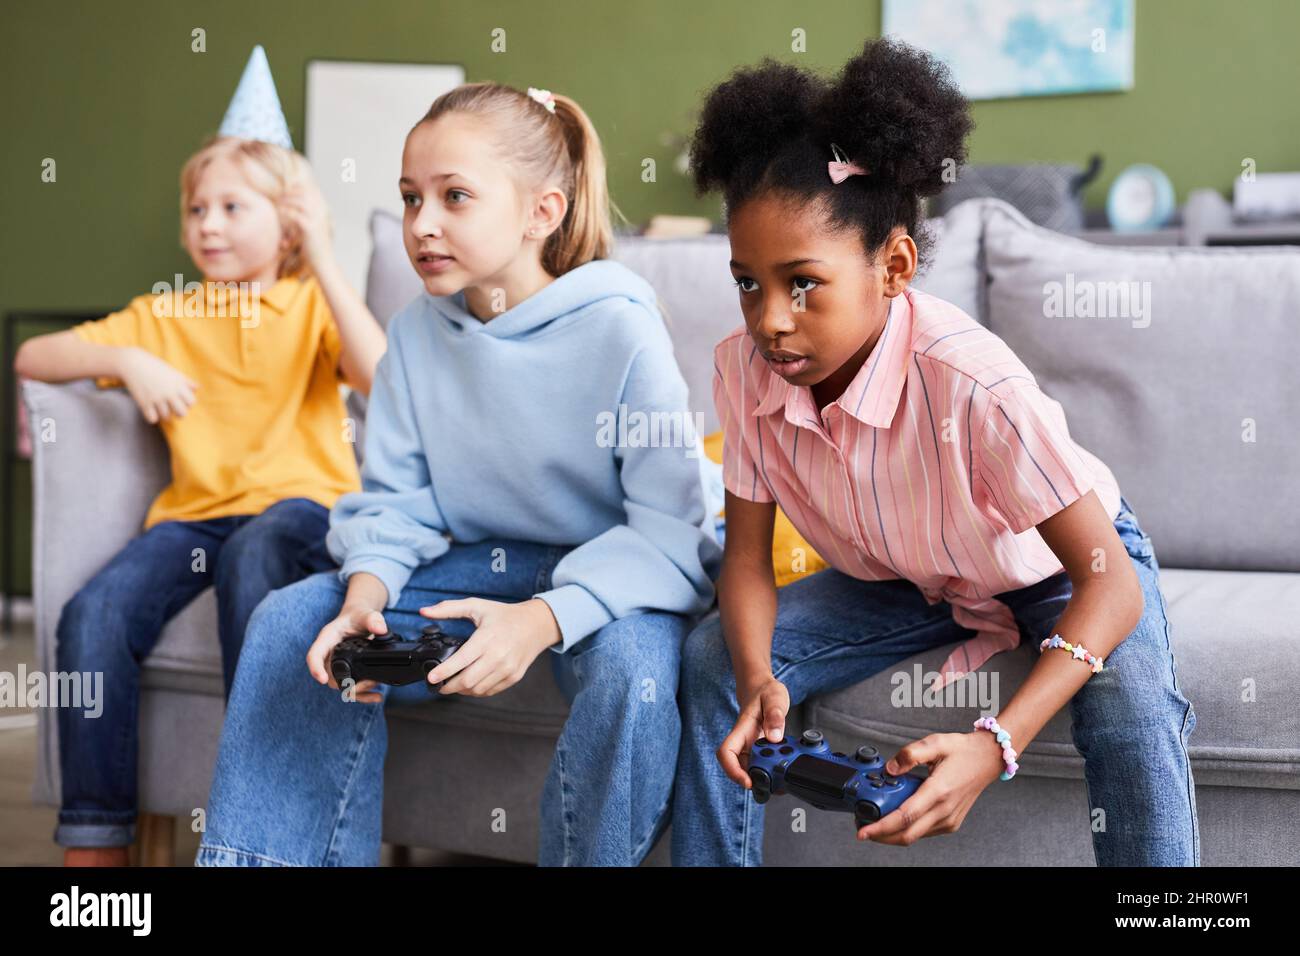 Boy playing a video game - Stock Image - T485/0068 - Science Photo